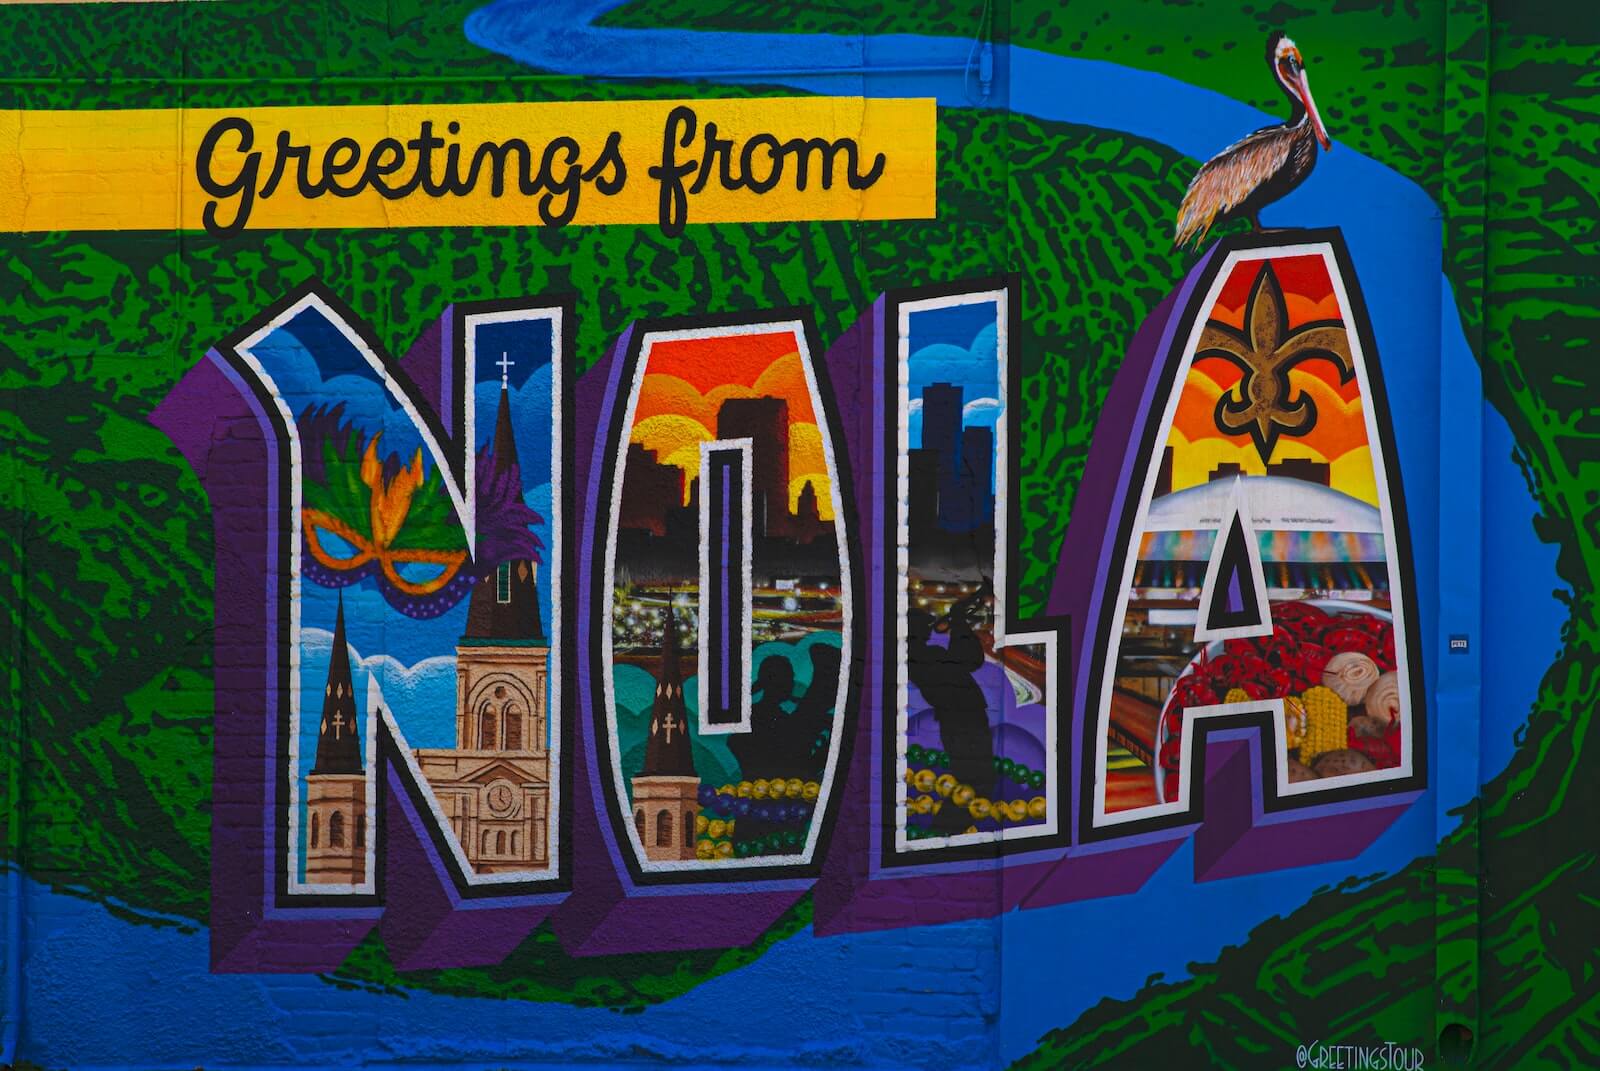 "Greetings from NOLA' photograph from New Orleans